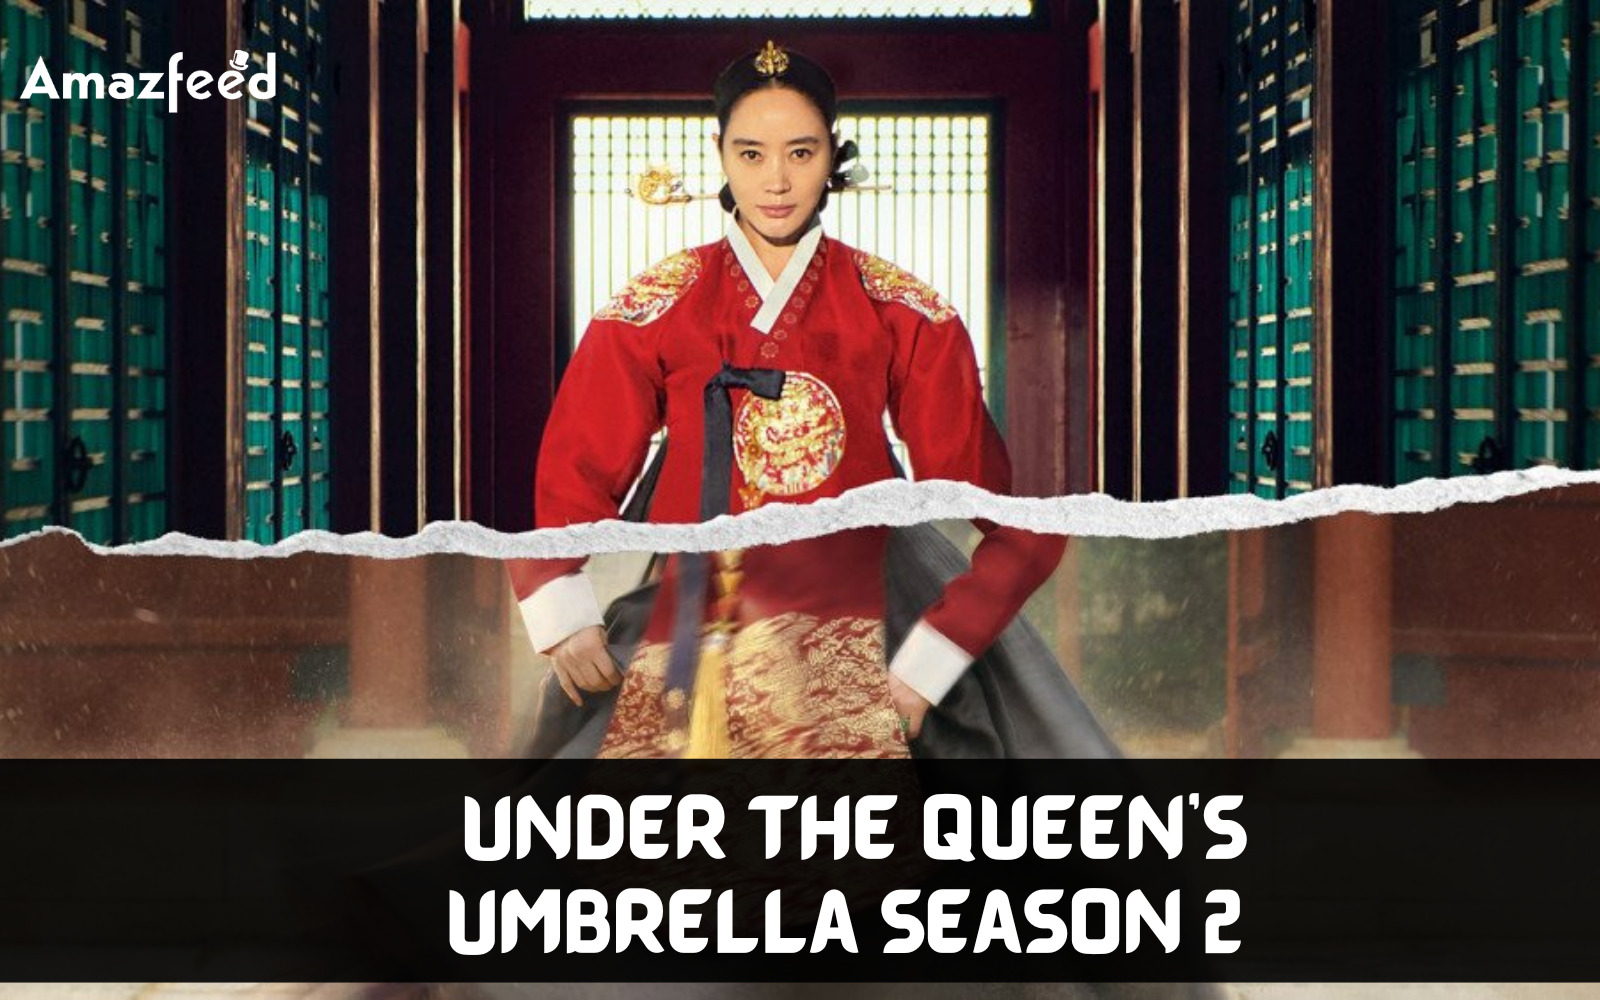 Is Under the Queen's Umbrella Season 2 Renewed Or Cancelled